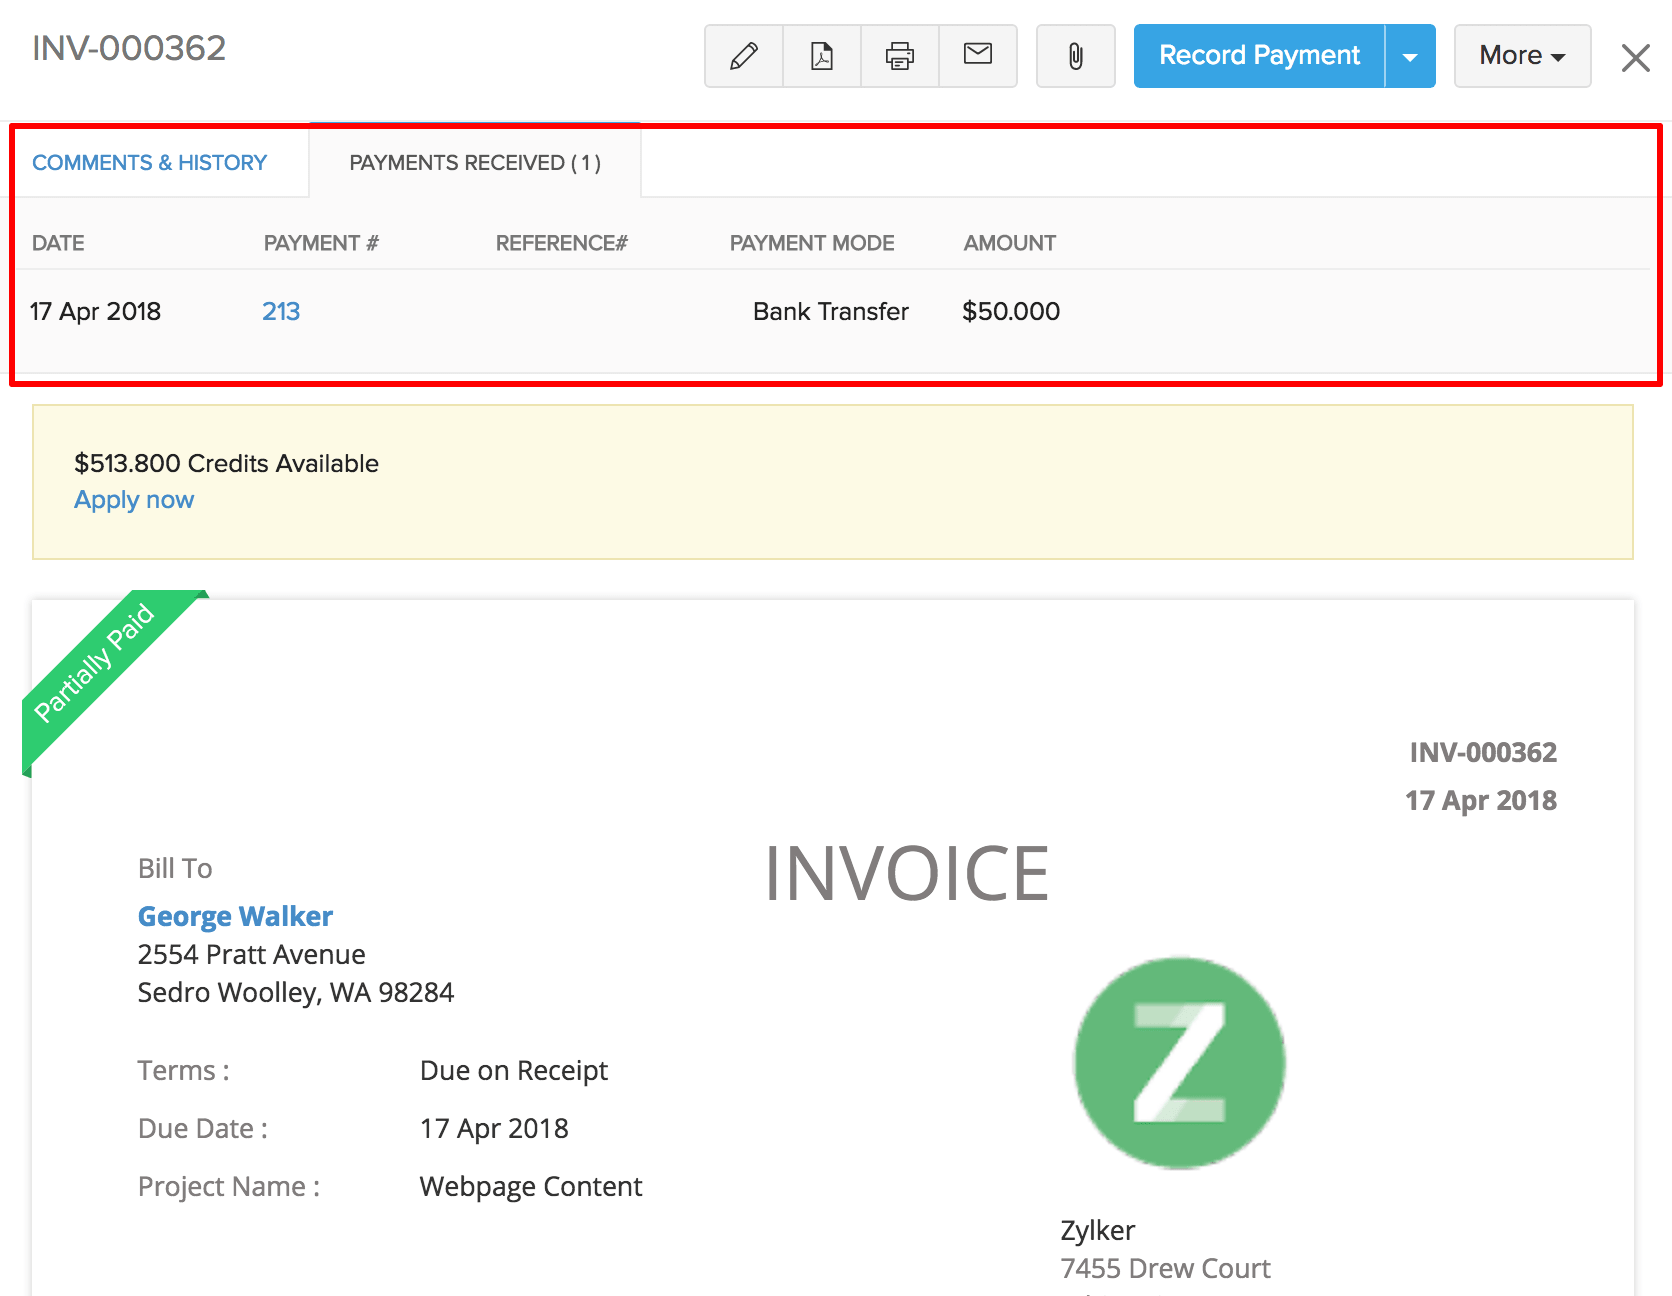 Invoice for Project